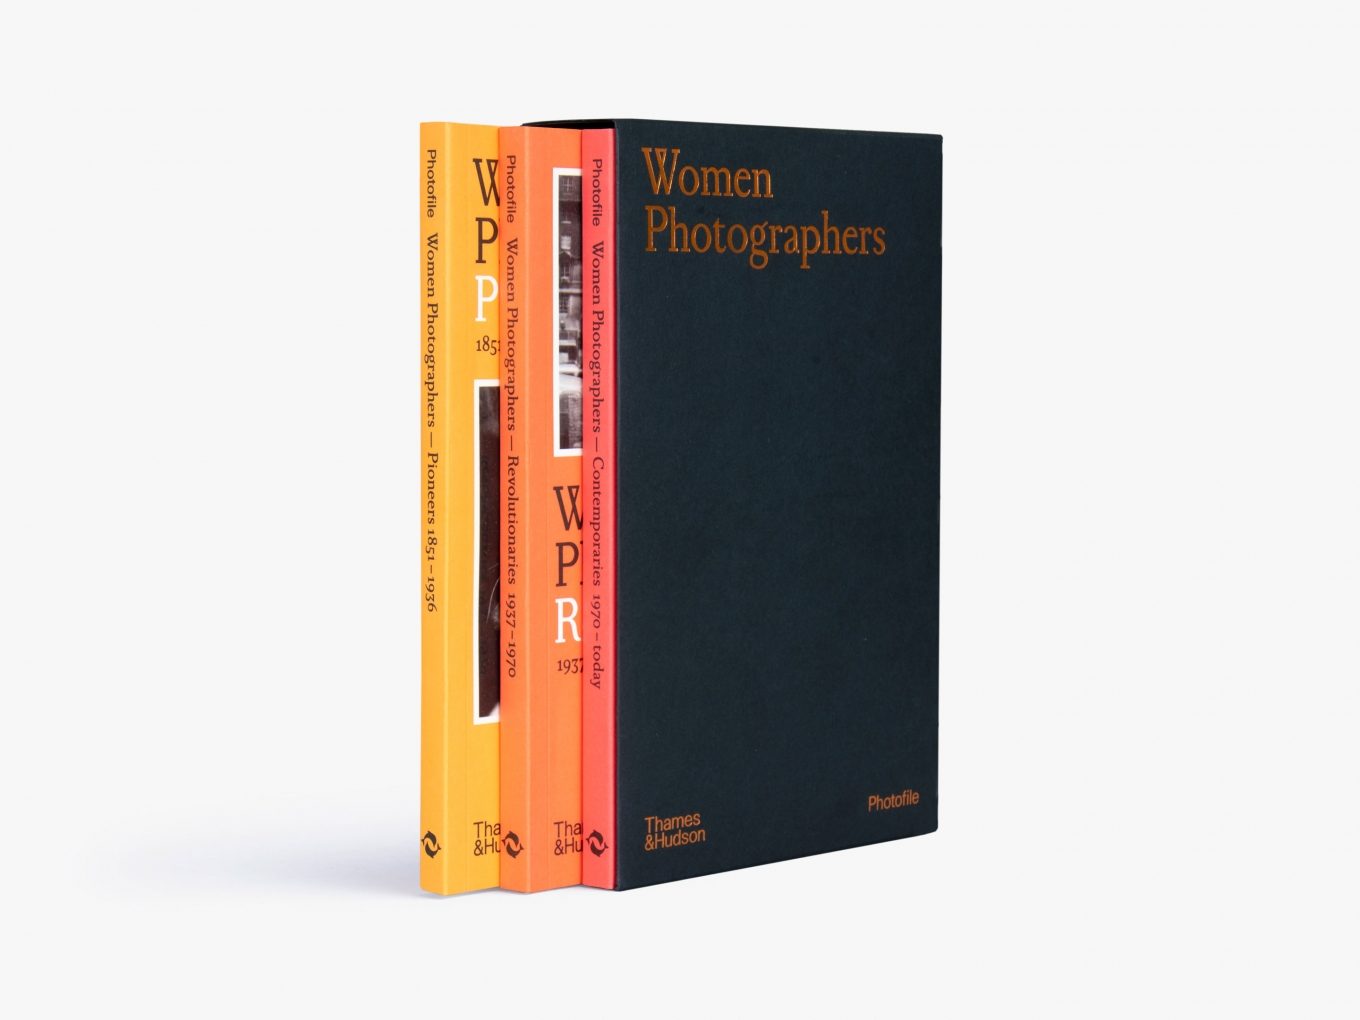 The Photofile Series published by Thames & Hudson: Digital Photography  Review